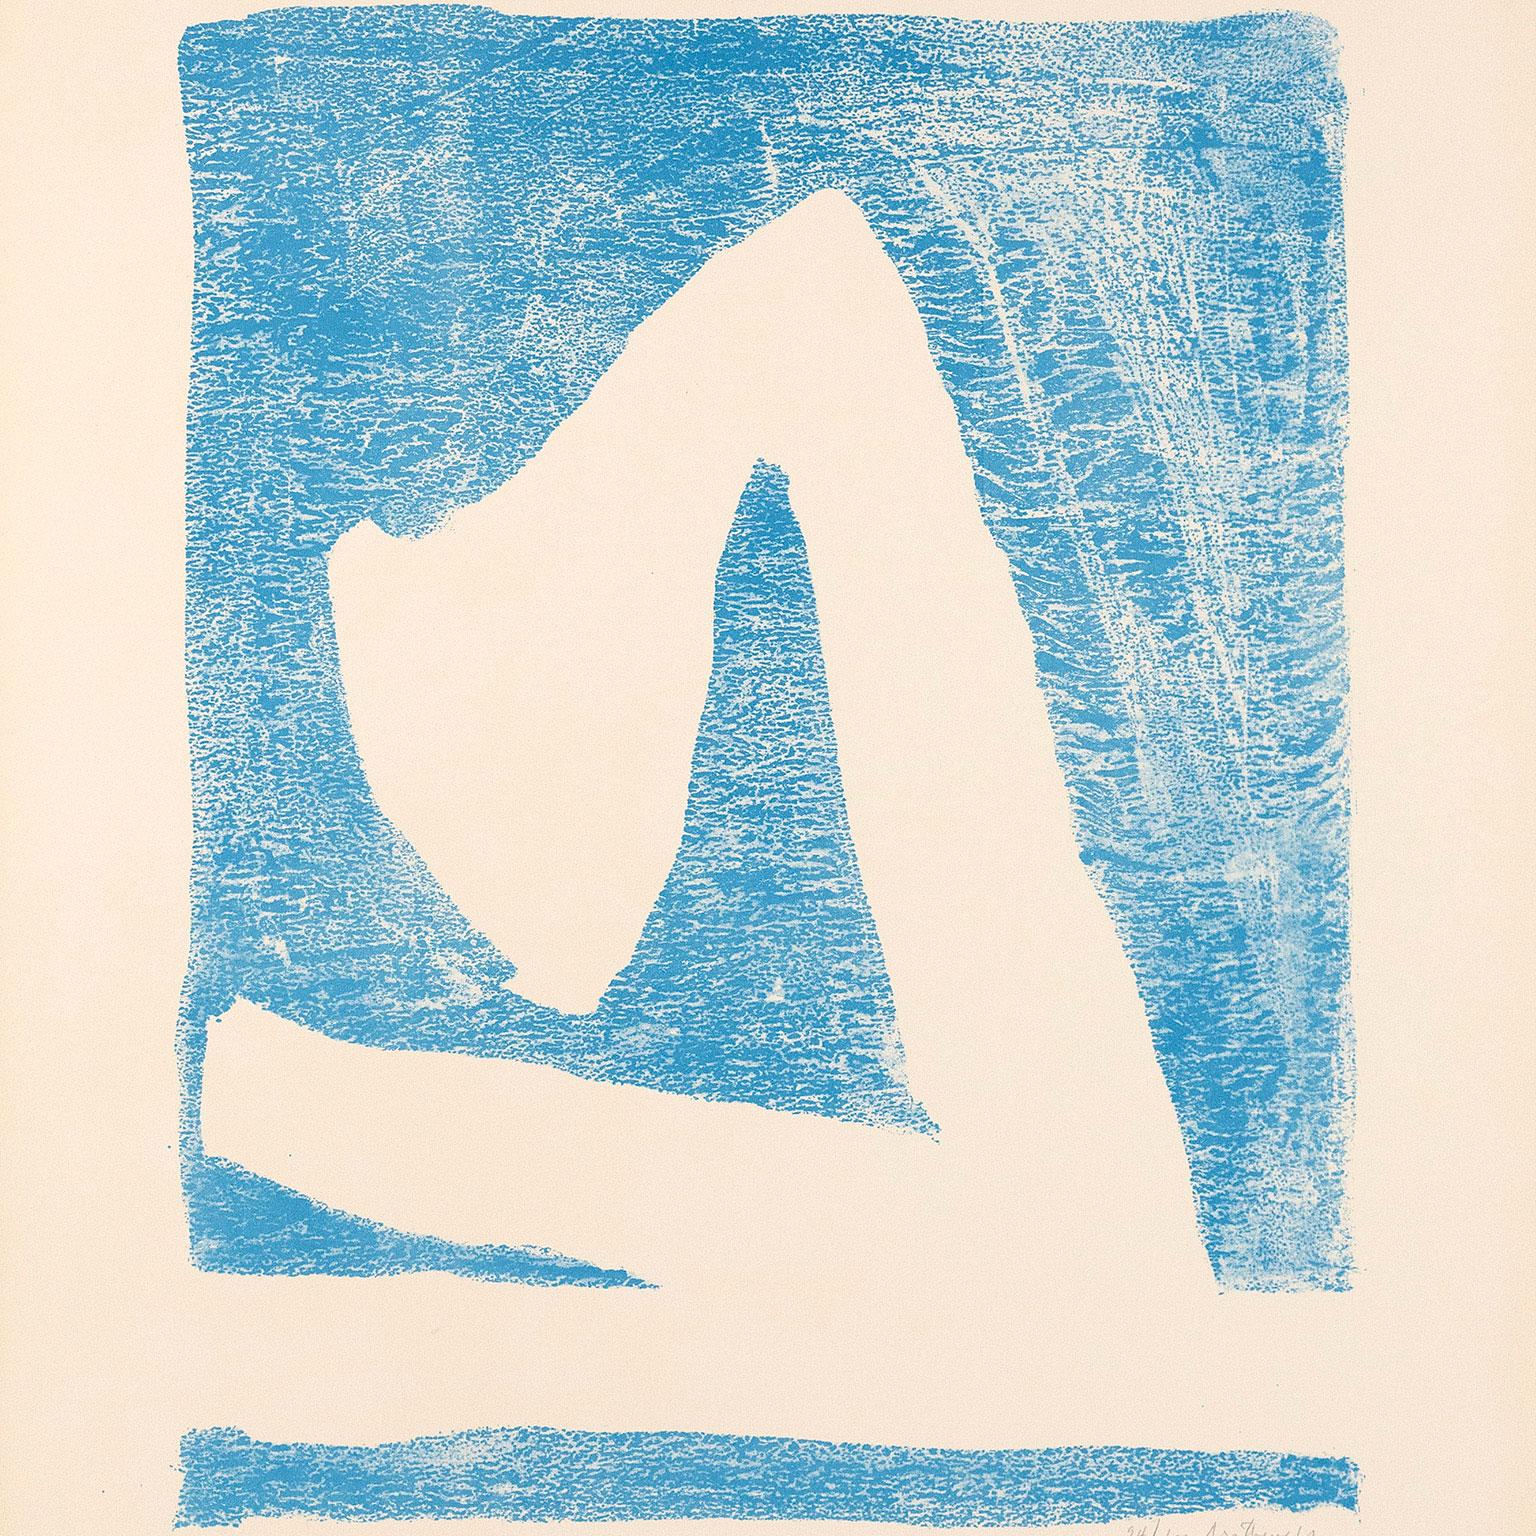 Summertime in Italy (Blue) - Painting by Robert Motherwell